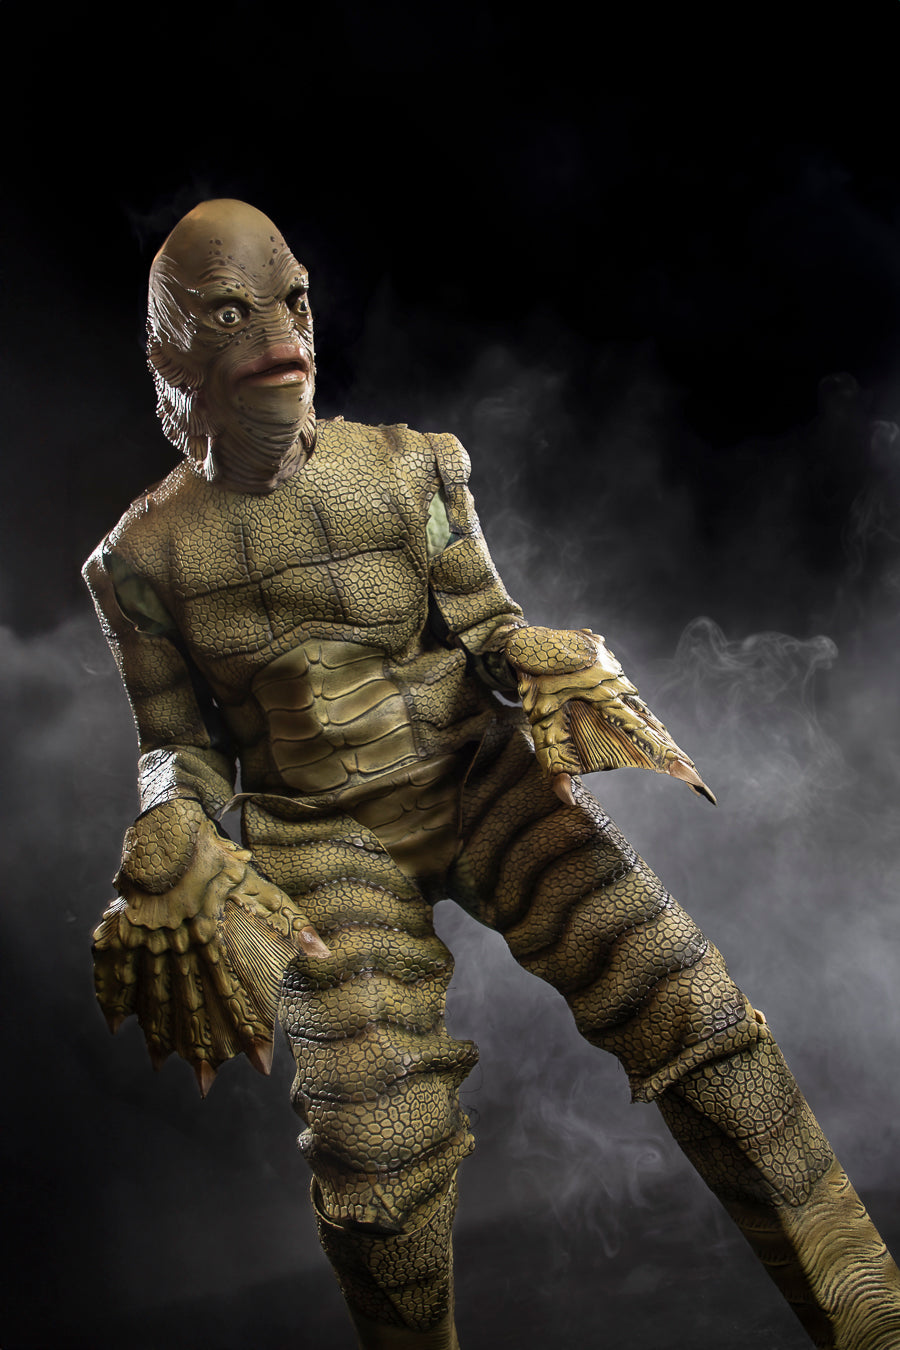 Universal Monsters Creature From the Black Lagoon Costume Hire or Cosplay, plus Makeup and Photography. Proudly by and available at, Little Shop of Horrors Costumery 6/1 Watt Rd Mornington & Melbourne.